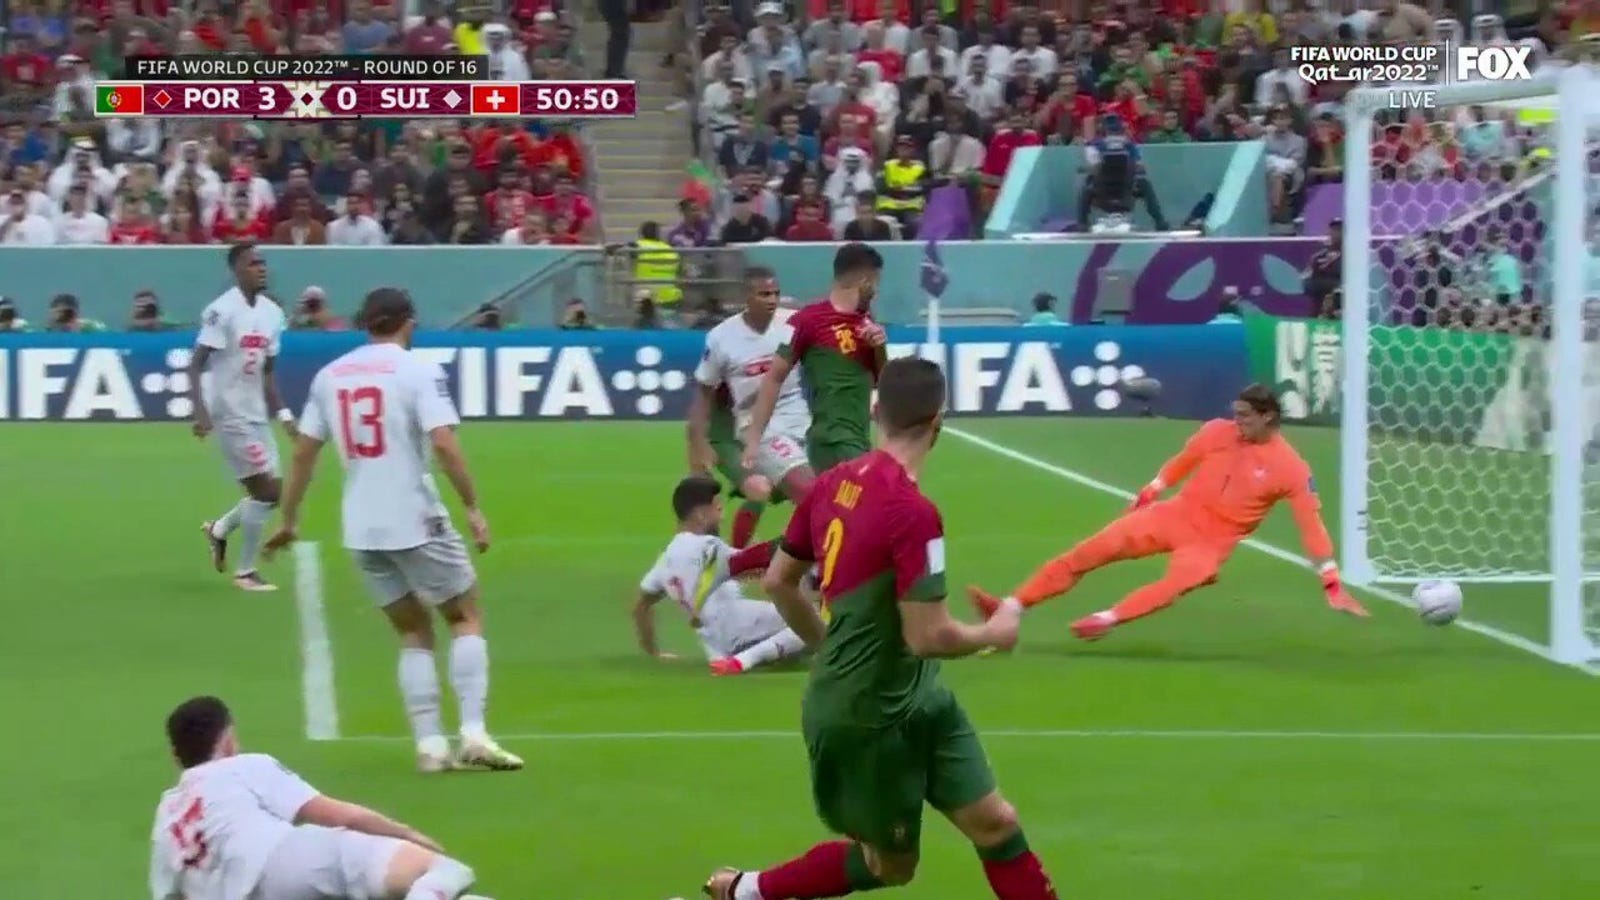 Portuguese Goncalo Ramos scores a goal against Switzerland in the 50th minute